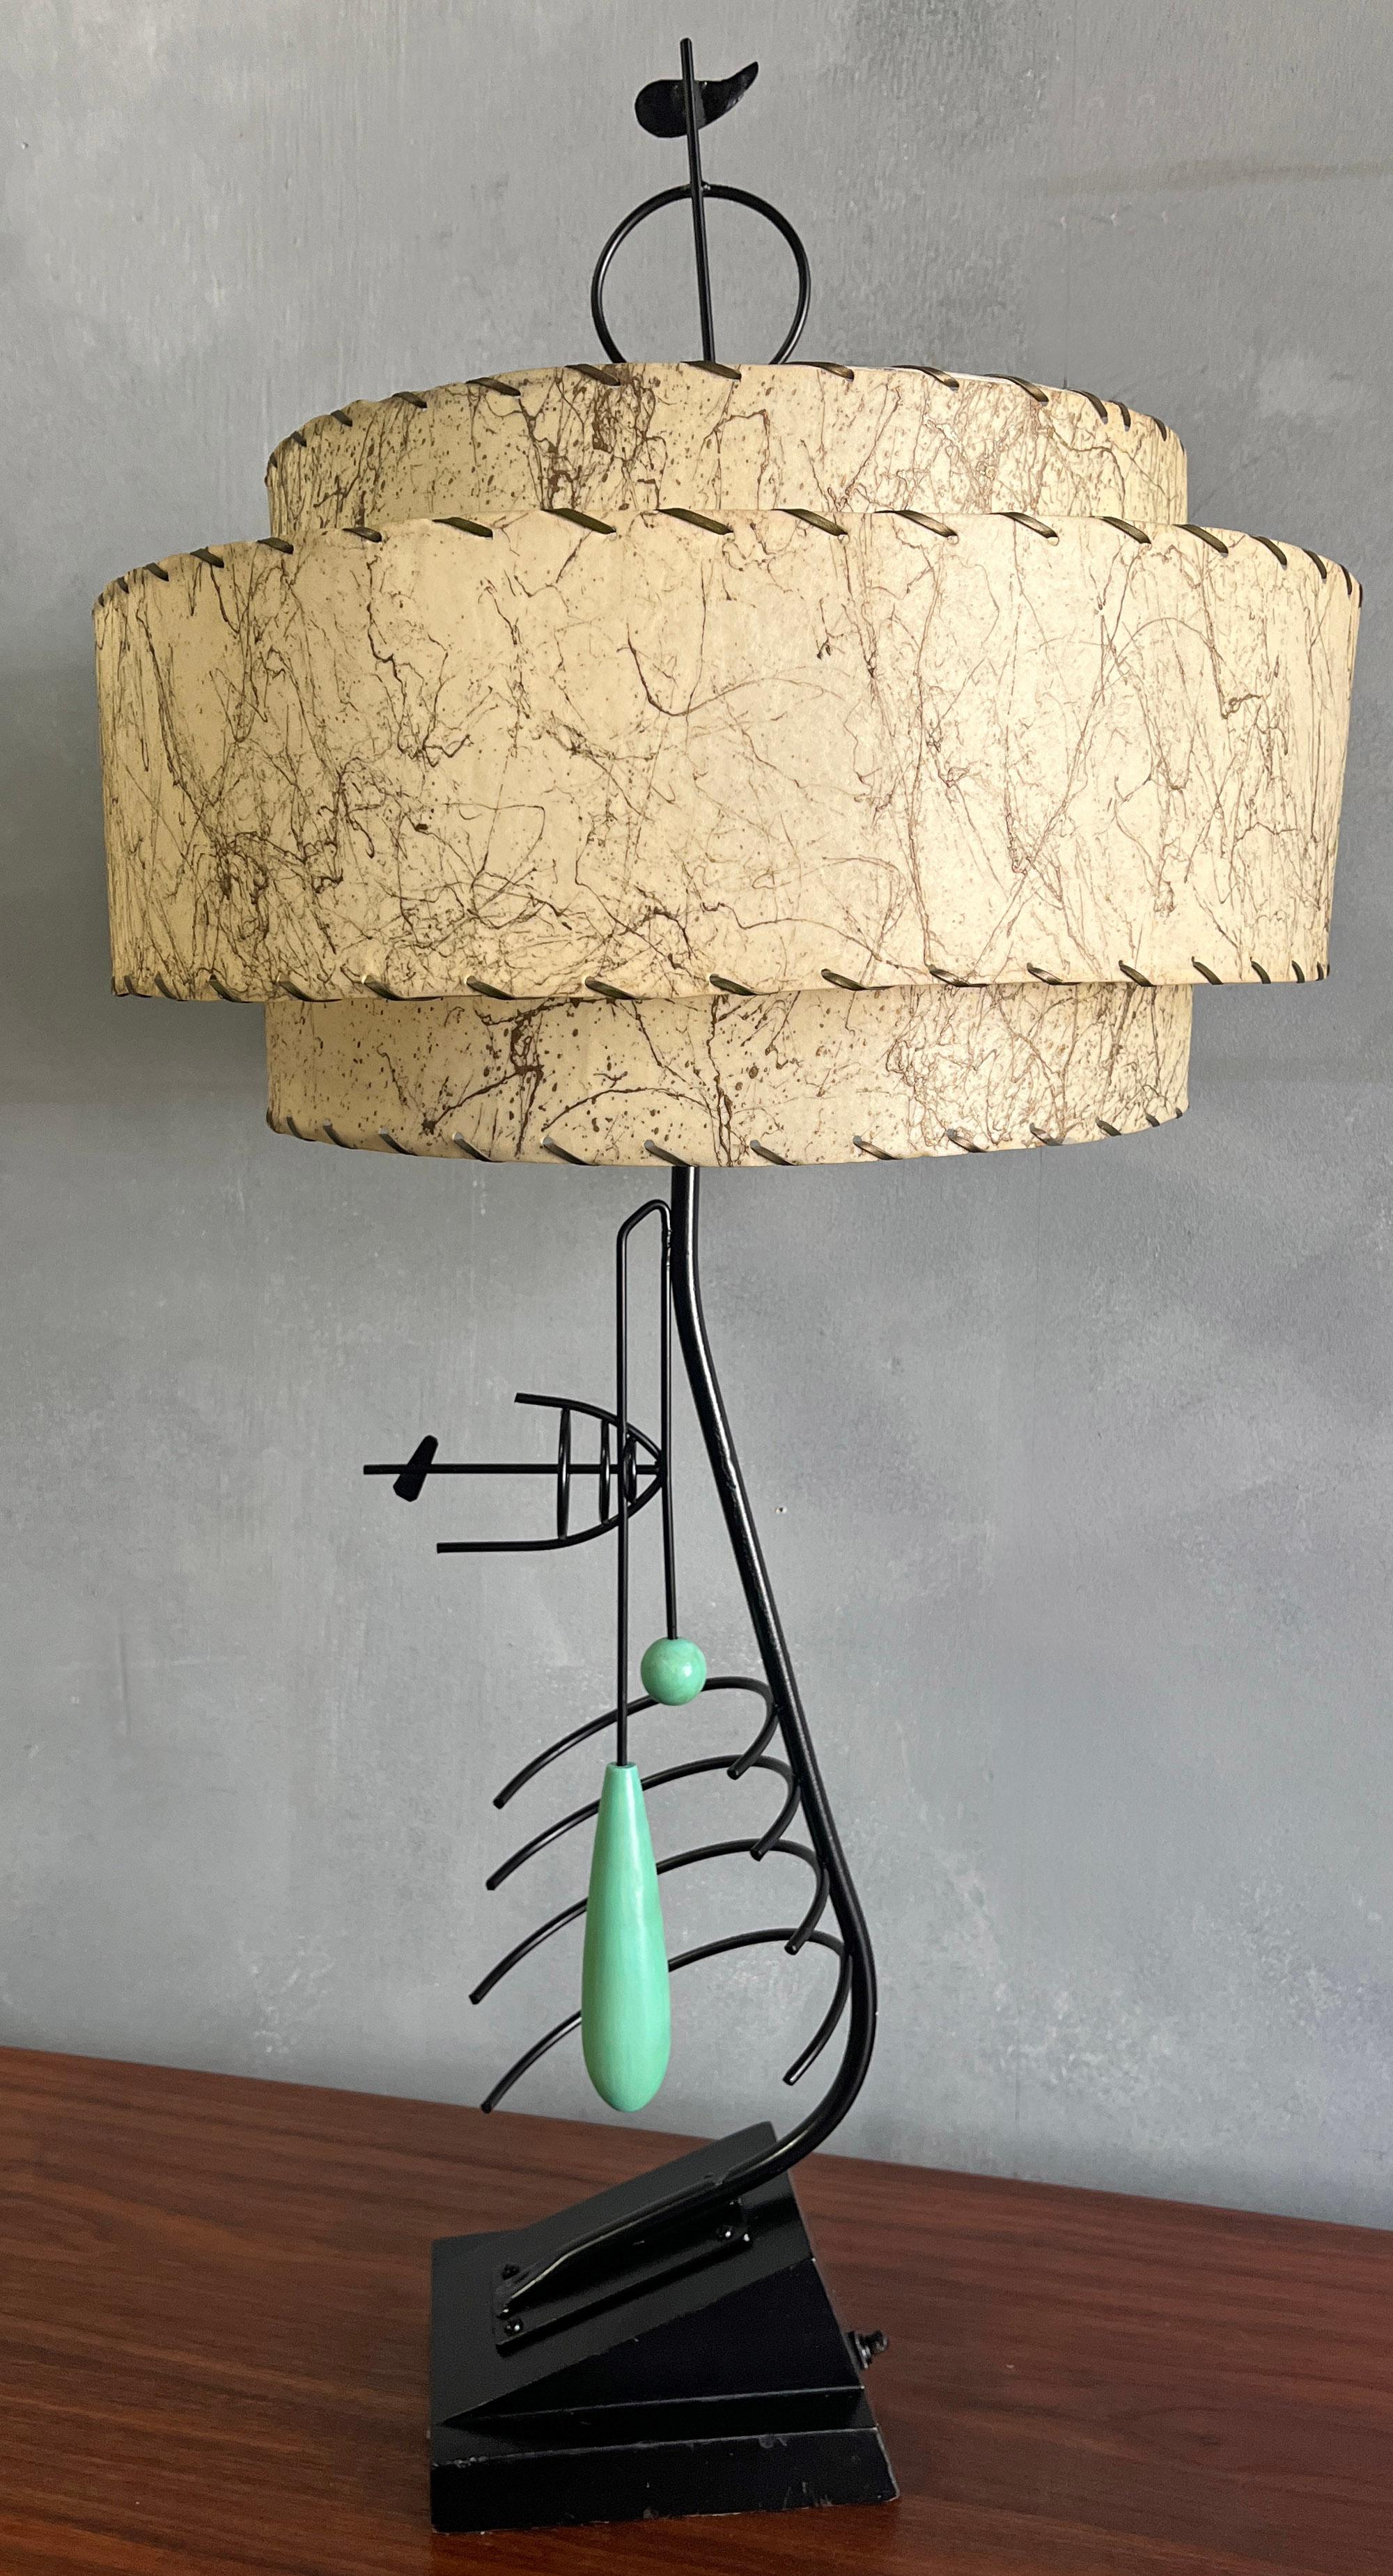 Gorgeous sculpted lamp with painted metal and wood forms akin to Miro. Black and seafoam green base together with original three tier shade proves to be a mid-century stunner. Toped with a custom Finial. Hand made by framed artist / designer. In